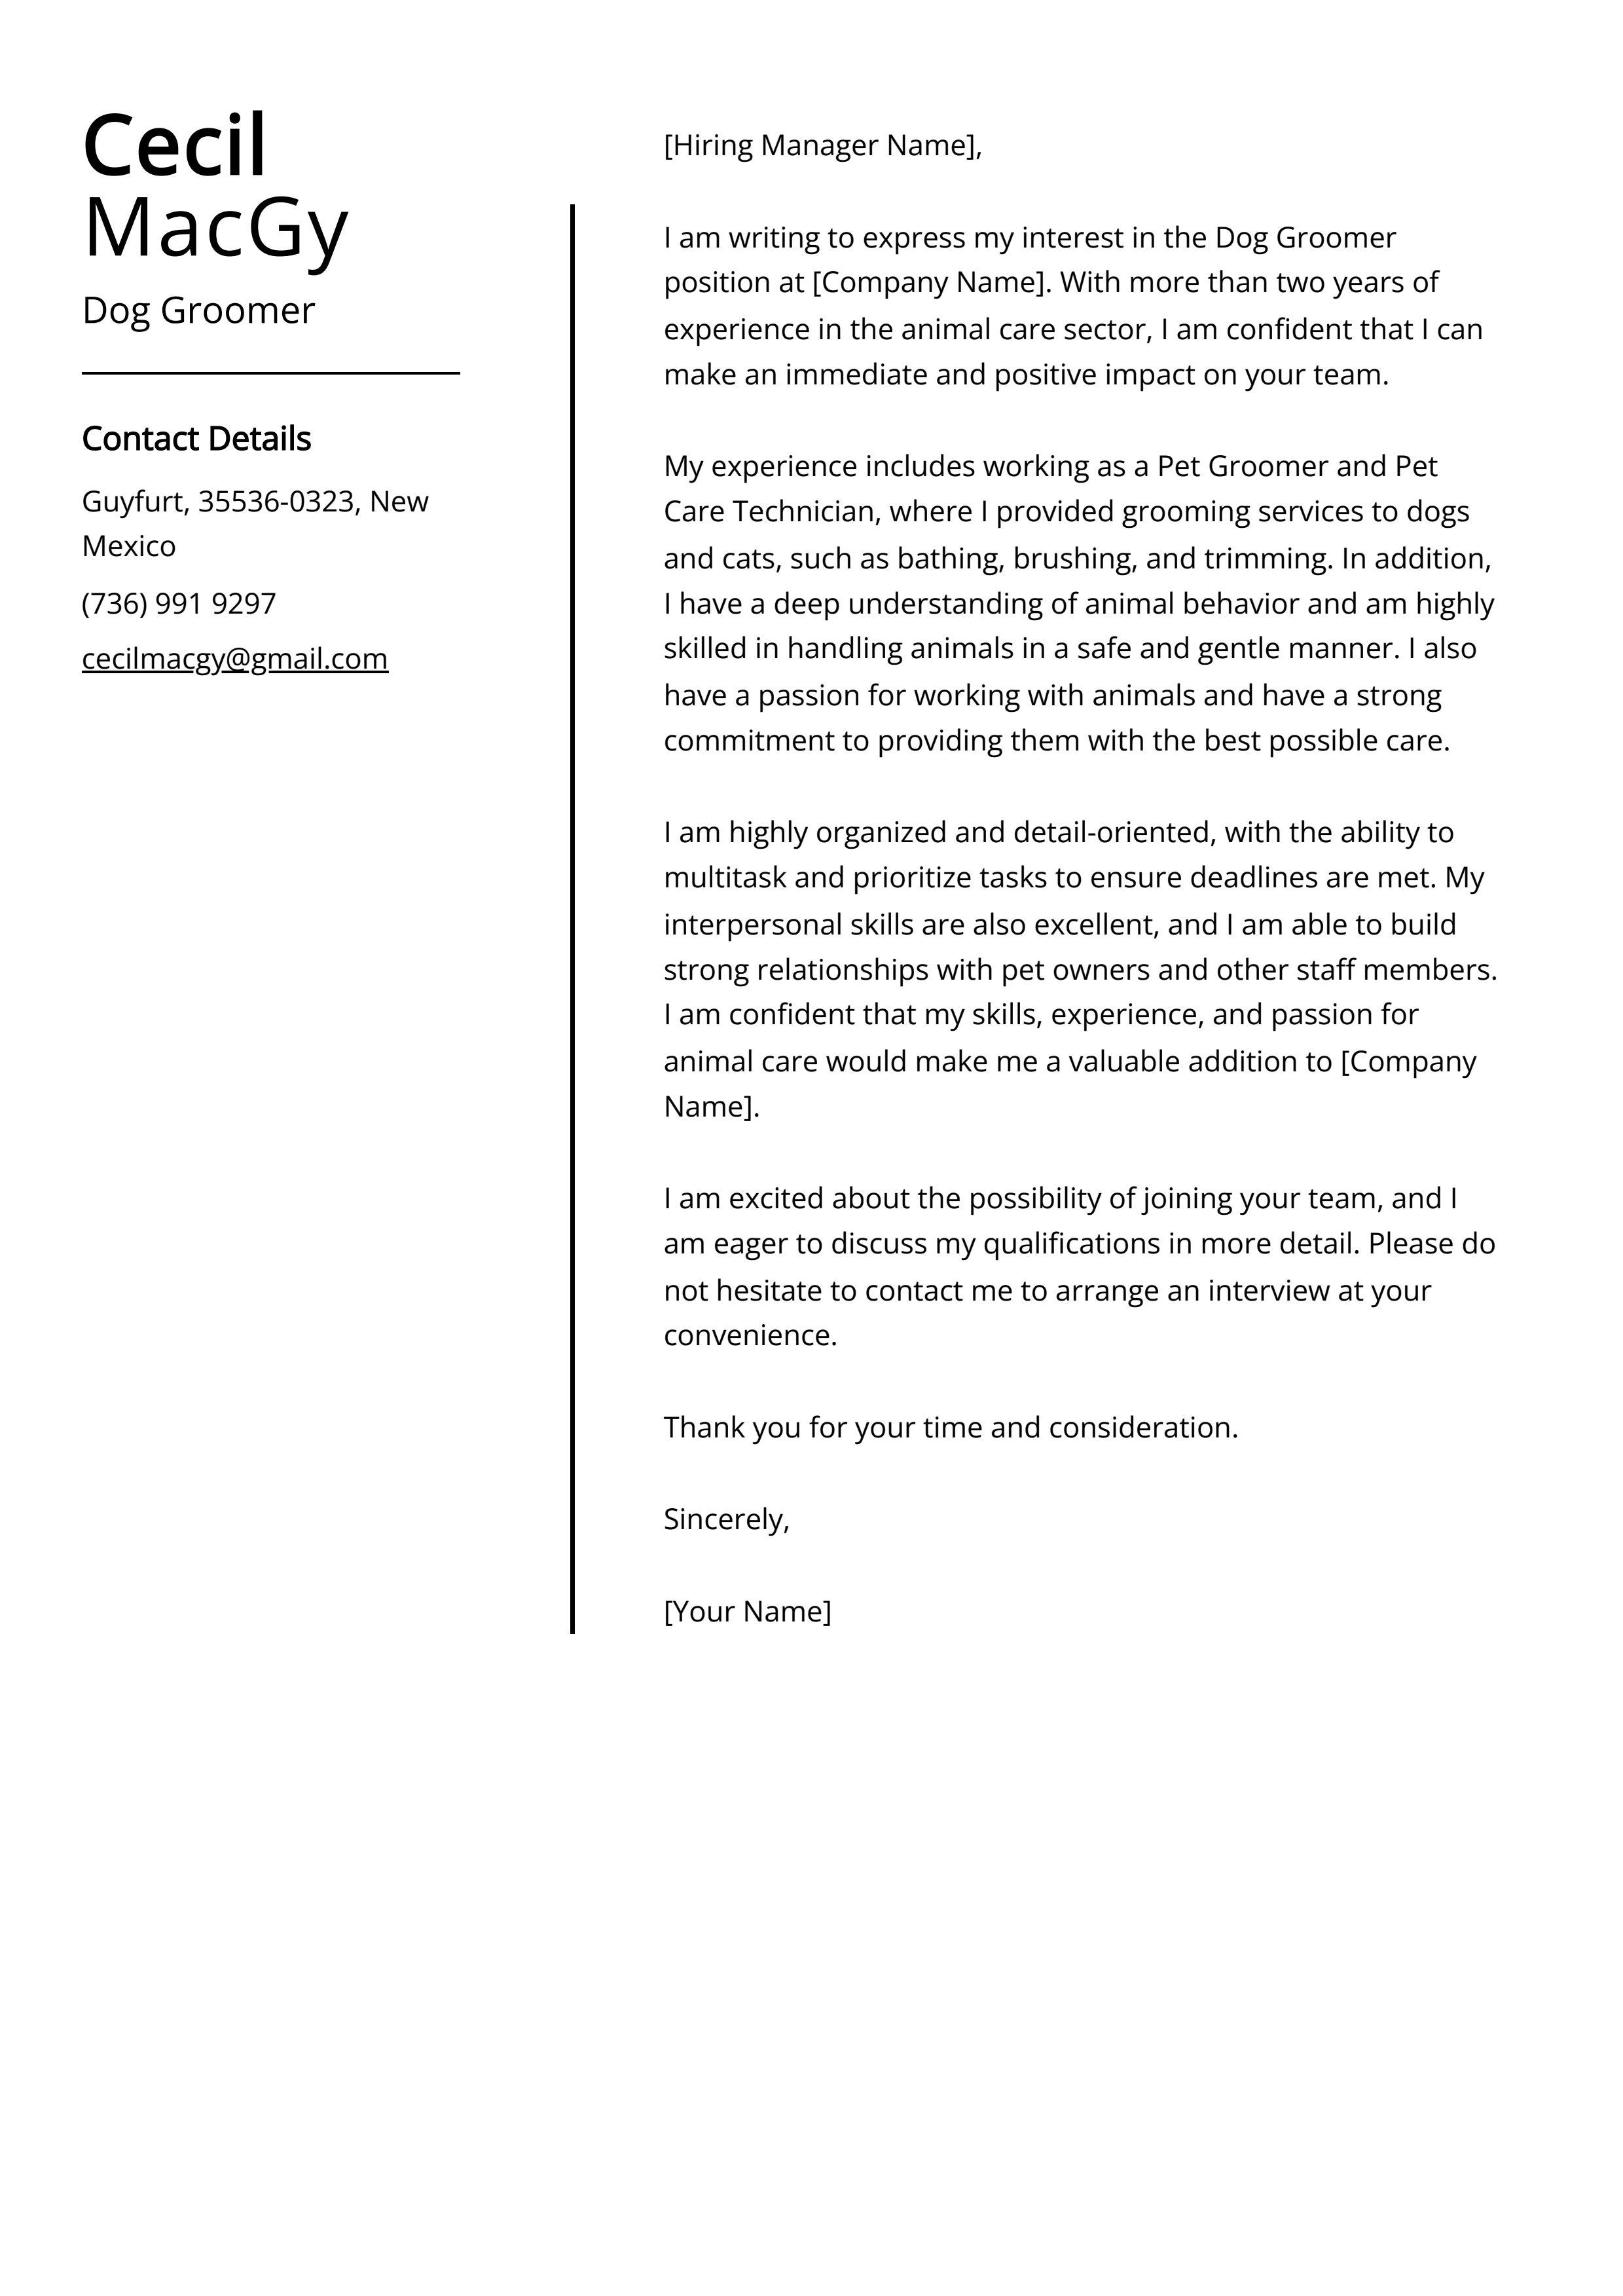 Dog Groomer Cover Letter Example (Free Guide)